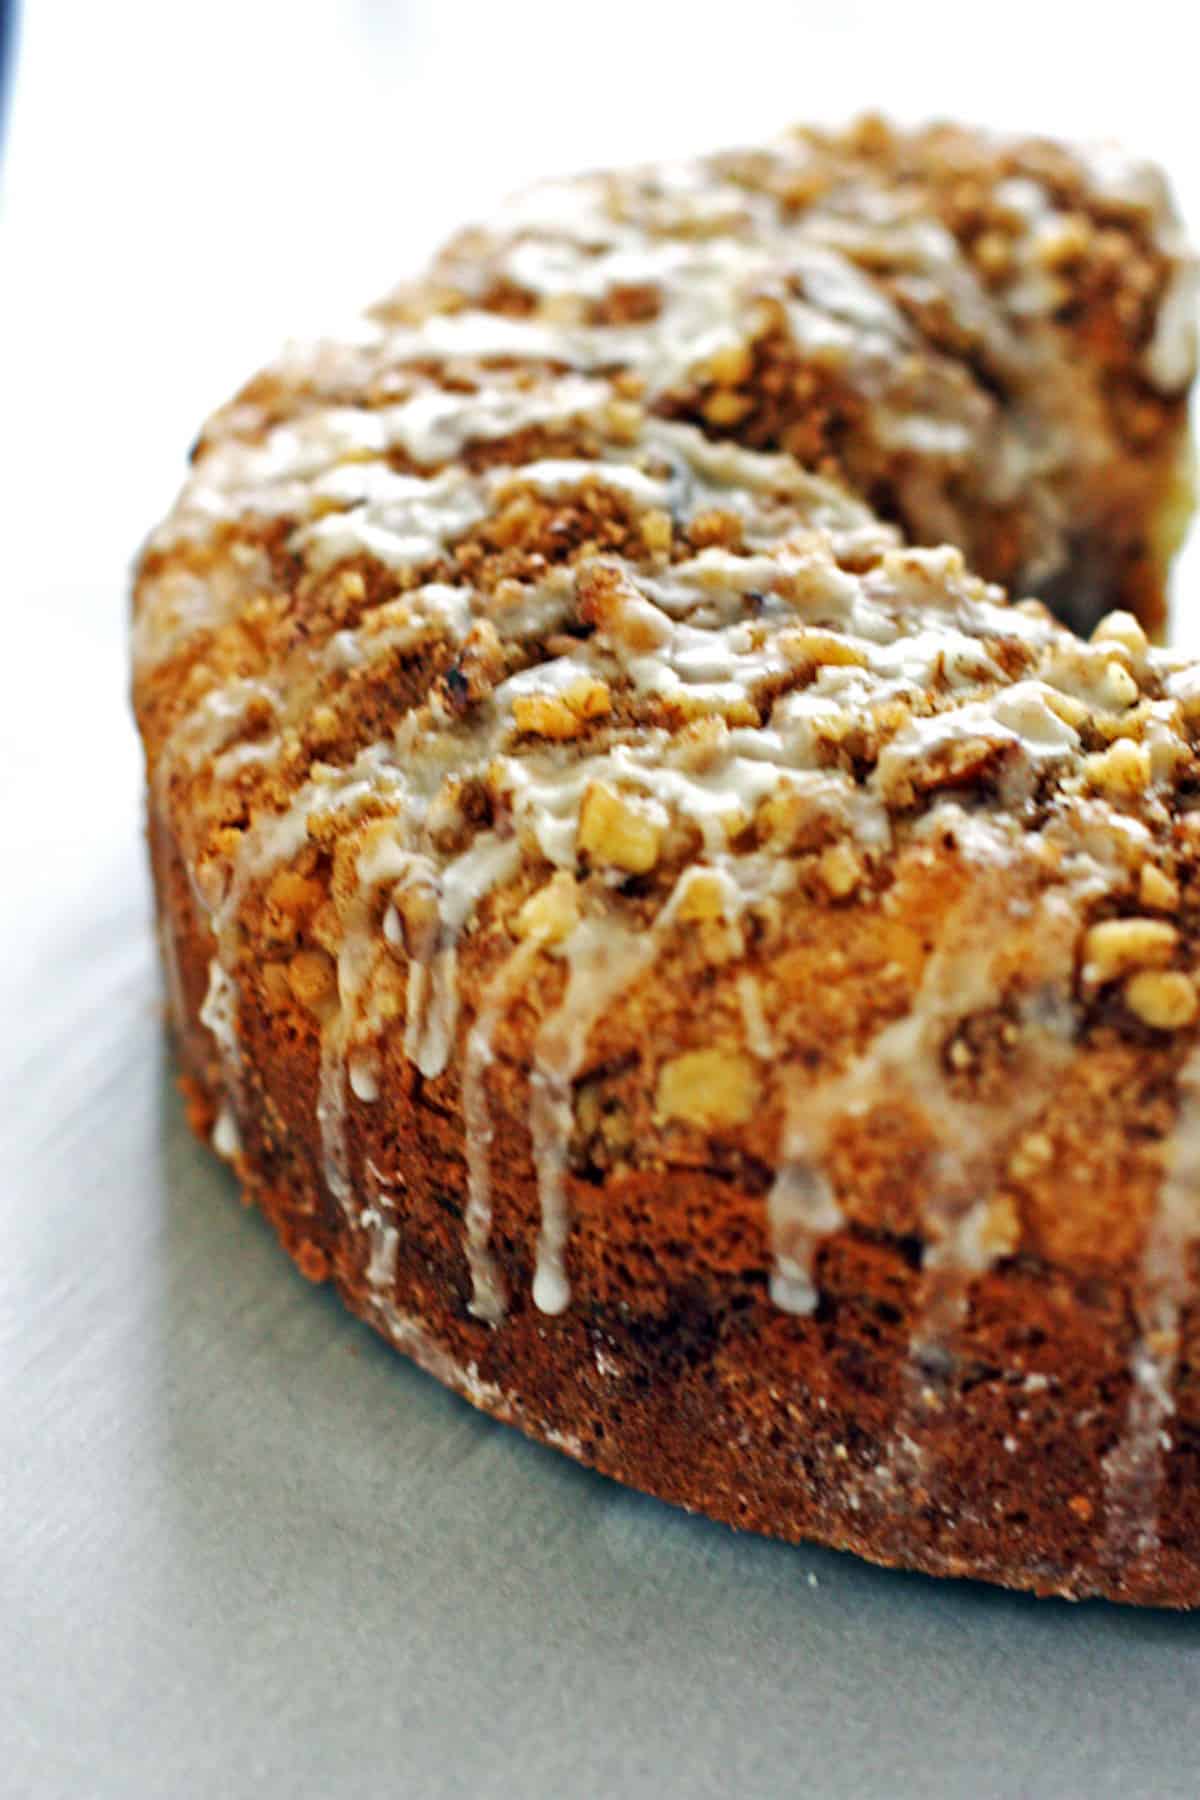 A cinnamon streusel coffee cake from the side with glaze dripping down.